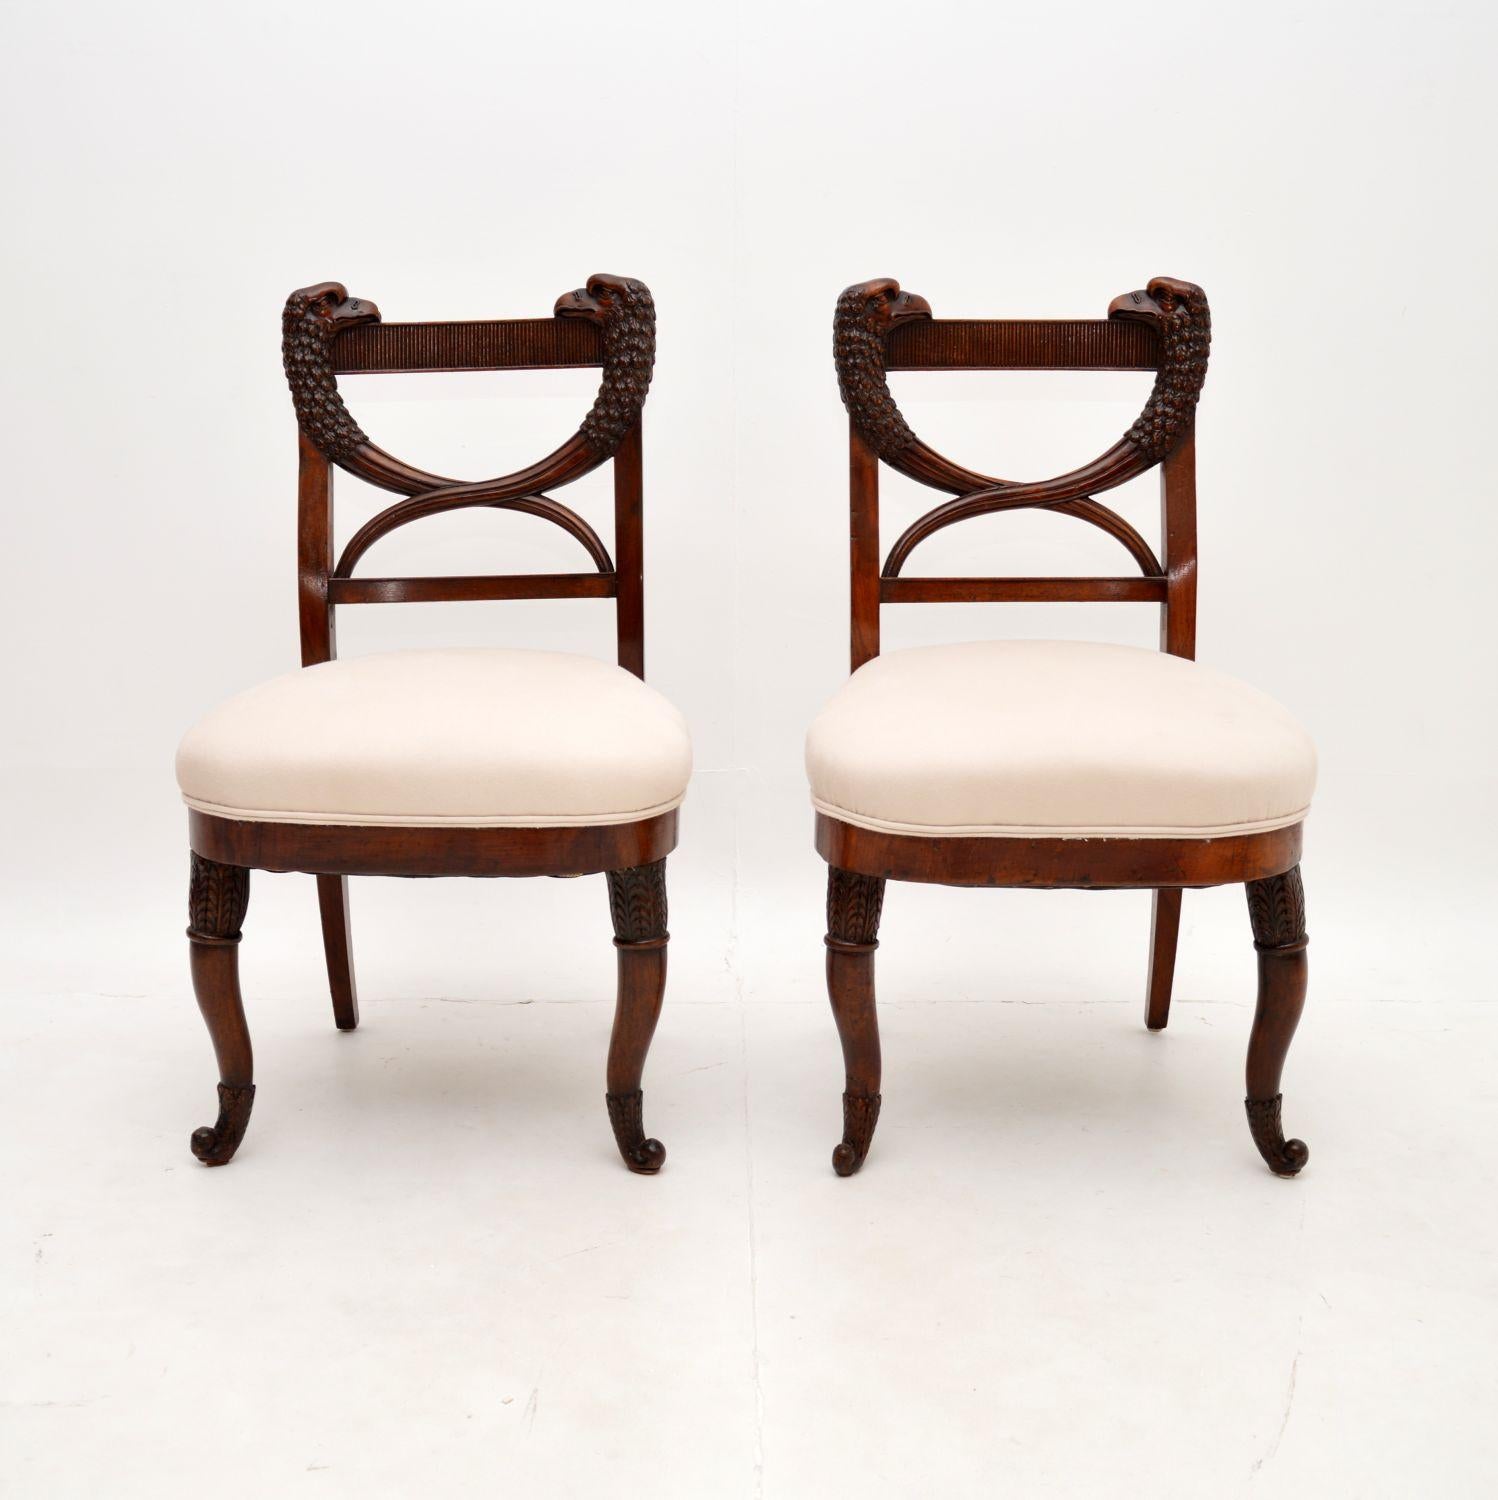 A fantastic pair of antique carved side chairs. They were made in continental Europe, possibly Denmark, or somewhere close and they are quite early, dating from around the 1790-1820 period, or even earlier.

The quality is outstanding, they have